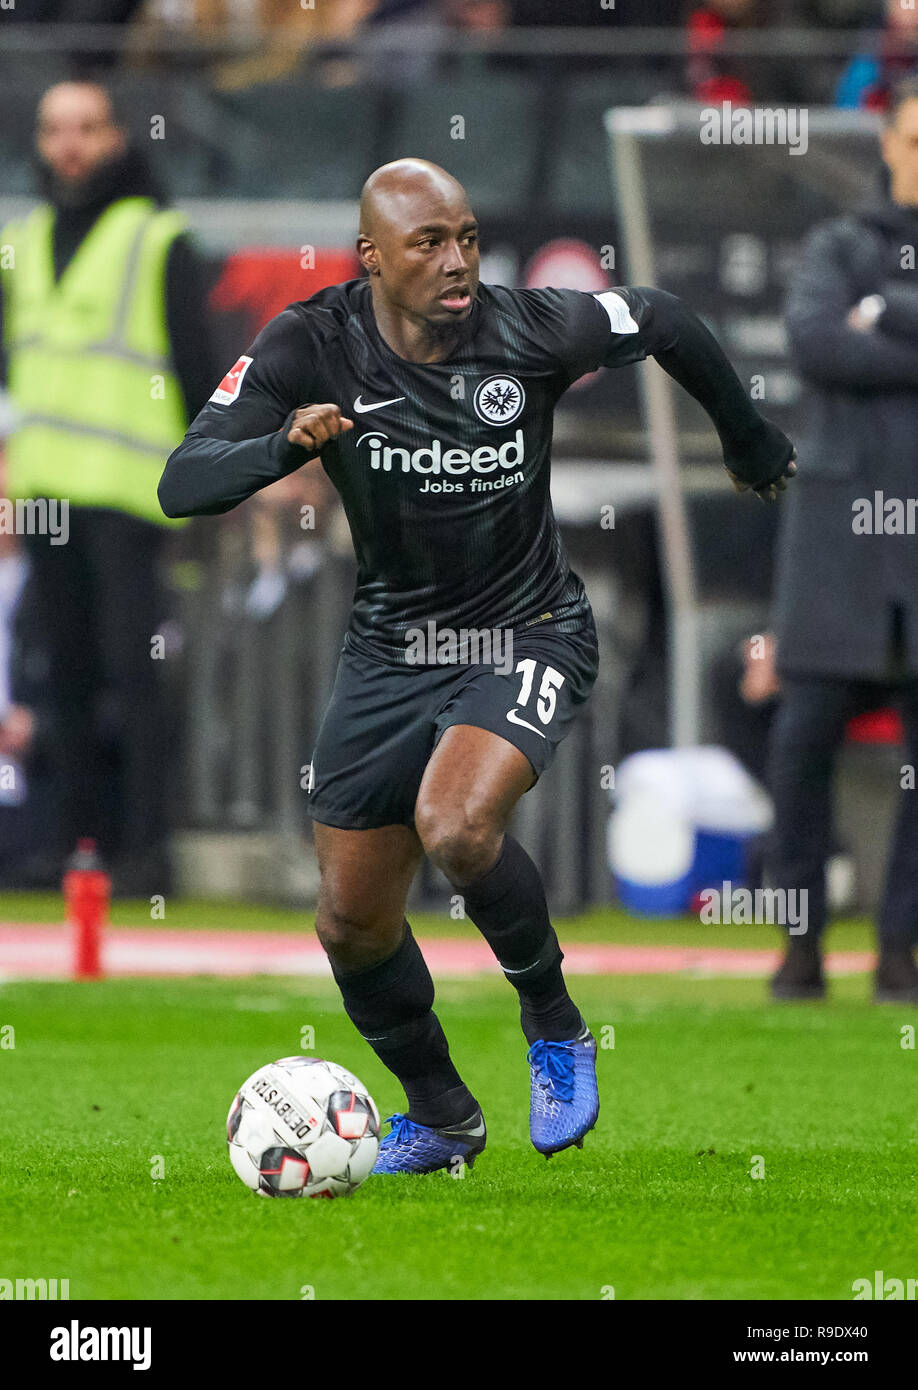 Frankfurt, Germany. 22nd Dec, 2018. Jetro WILLEMS, FRA 15 drives, controls the ball, action, full-size, Single action with ball, full body, whole figure, cutout, single shots, ball treatment, pick-up, header, cut out, EINTRACHT FRANKFURT - FC BAYERN MUNICH 0-3 - DFL REGULATIONS PROHIBIT ANY USE OF PHOTOGRAPHS as IMAGE SEQUENCES and/or QUASI-VIDEO - 1.German Soccer League, in Frankfurt, December 22, 2018 Season 2018/2019, matchday 17, FCB, München, Credit: Peter Schatz/Alamy Live News Stock Photo